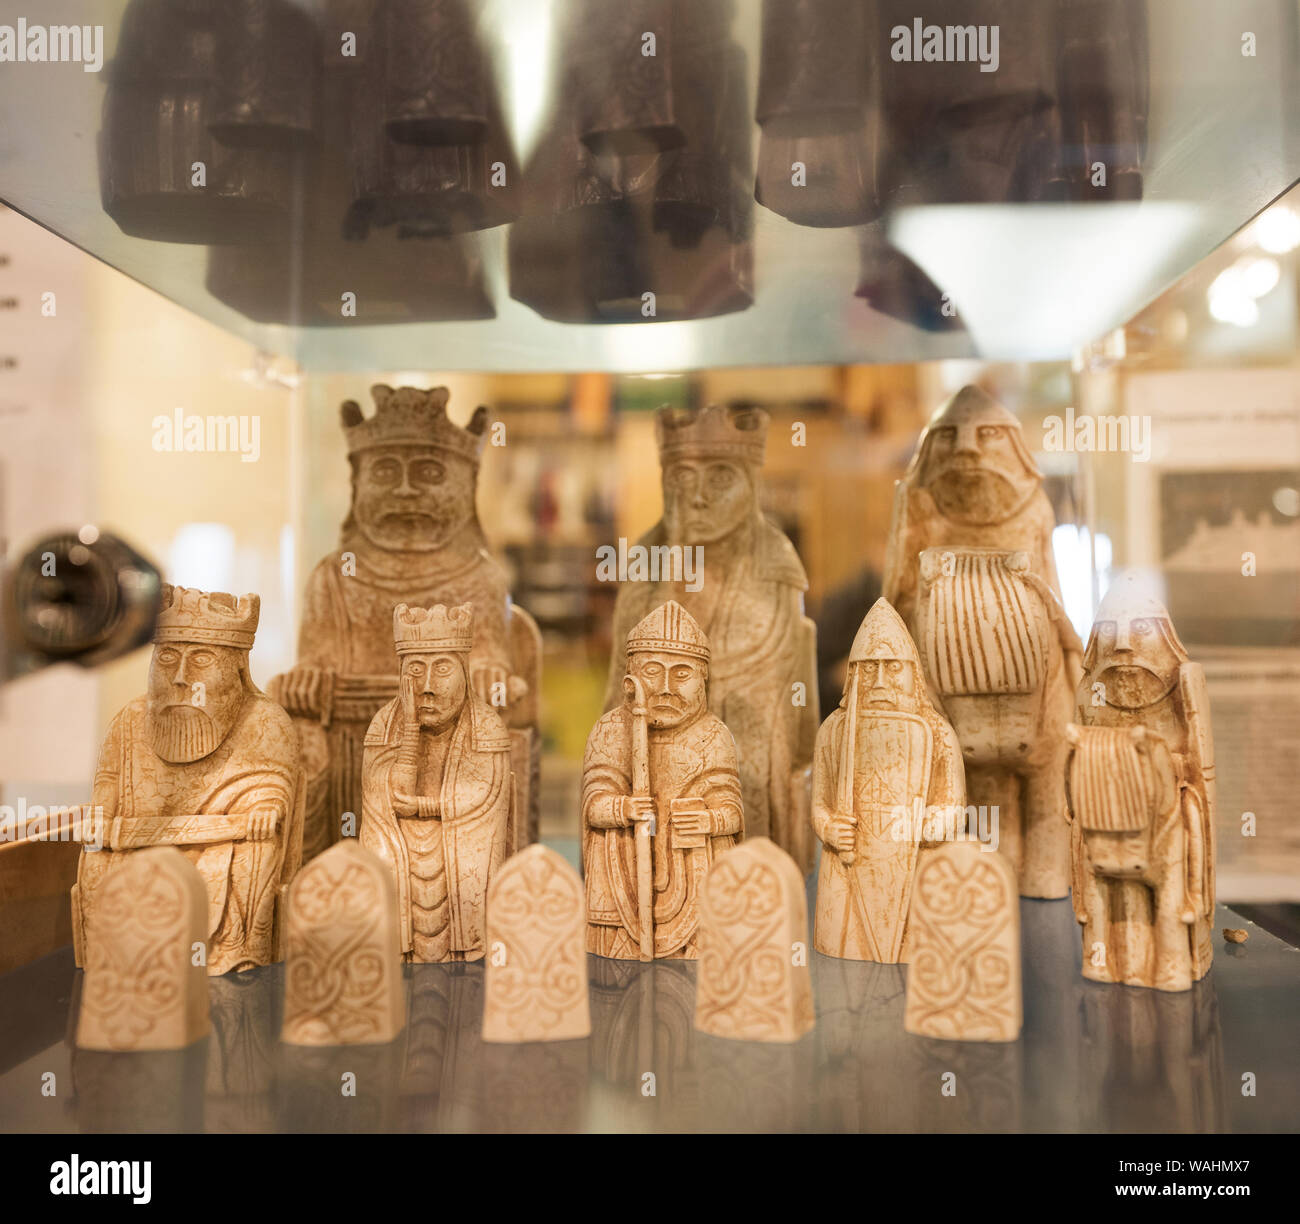 Replica chess pieces in the community museum at Uig based on famous Lewis Chessmen set carved from walrus ivory that drifted from a shipwreck at sea Stock Photo